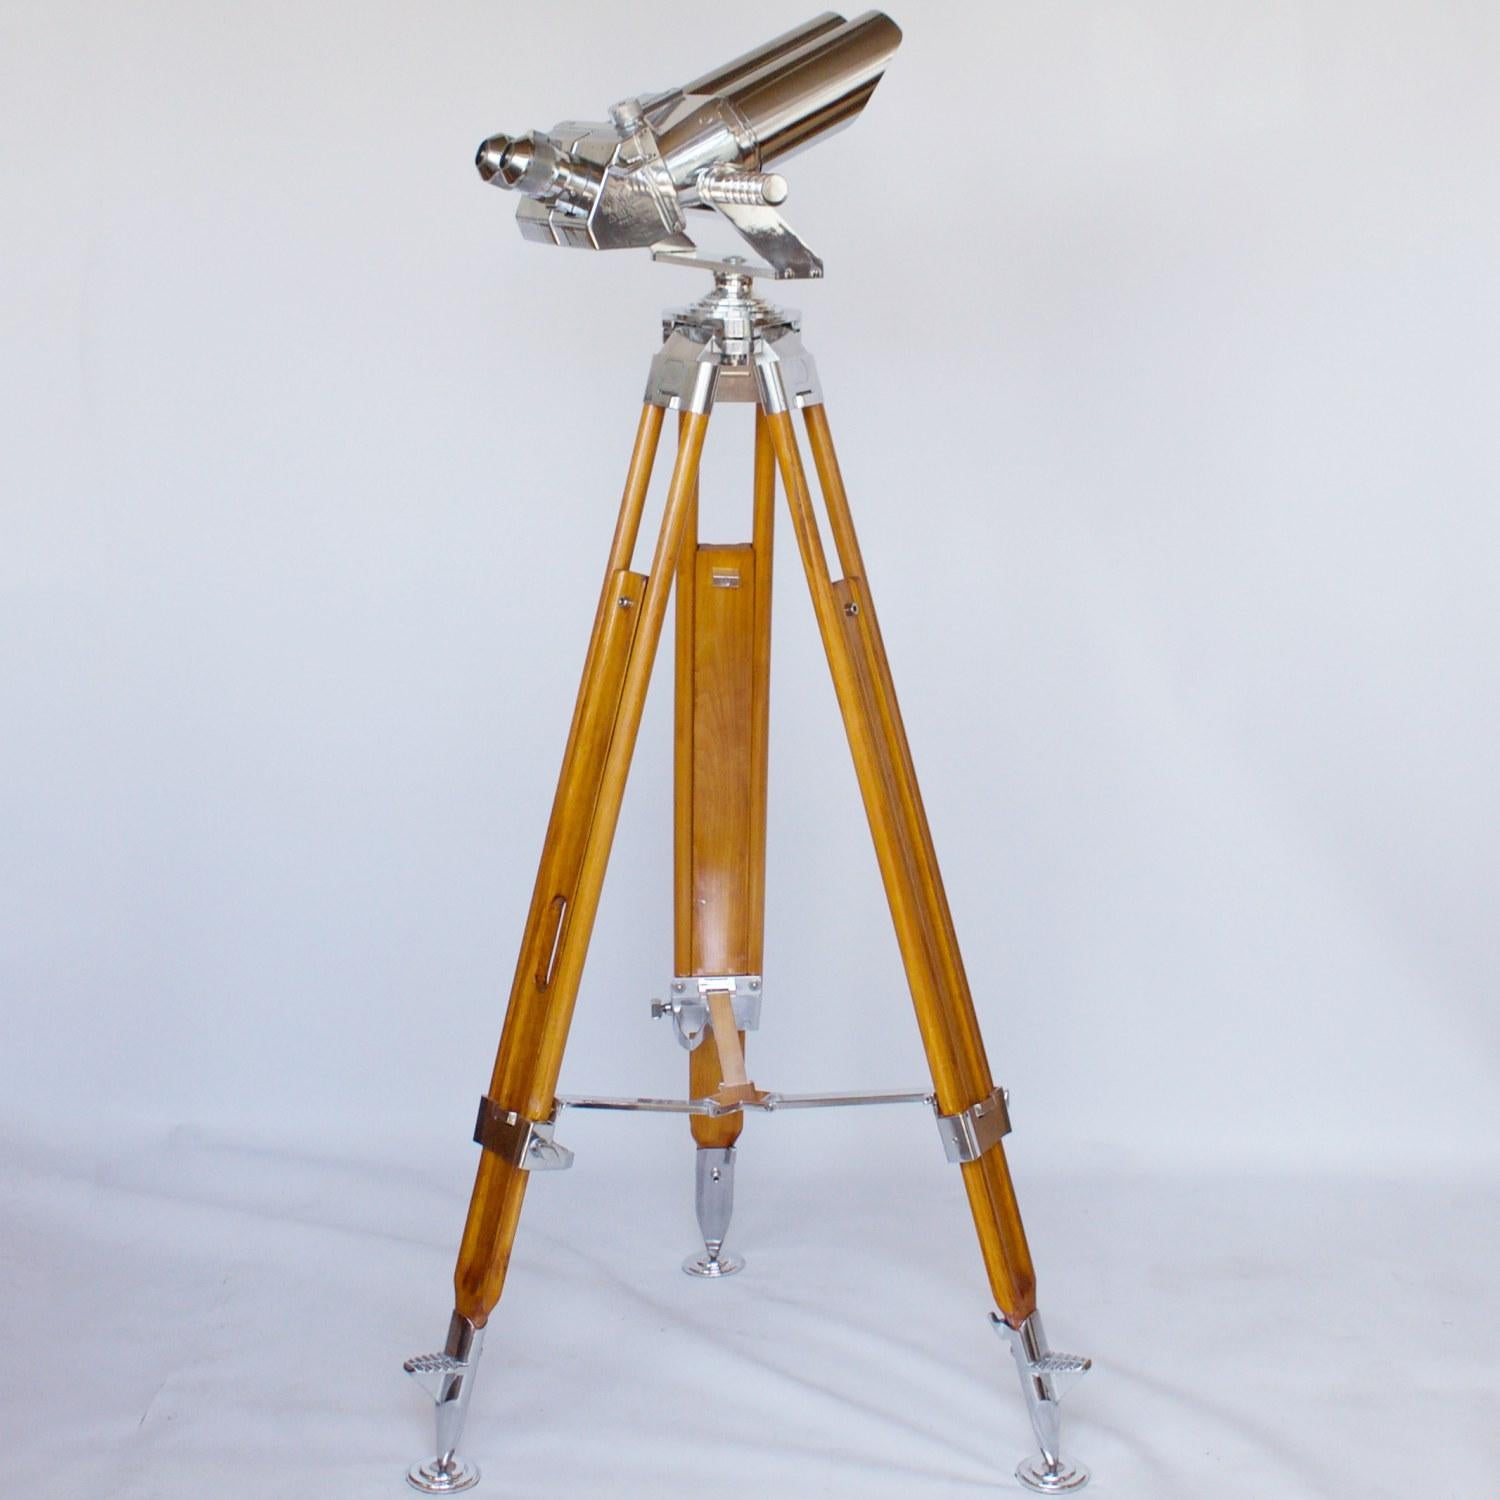 10x80 Zeiss naval binoculars with eyepieces set at 45 degrees. Set on period, extending wood and brass stand with chromed conical feet. 10 times magnification with 80mm objective lens.

Dimensions: H with stand 1m - 1.5m, Barrel L 21cm, Total L